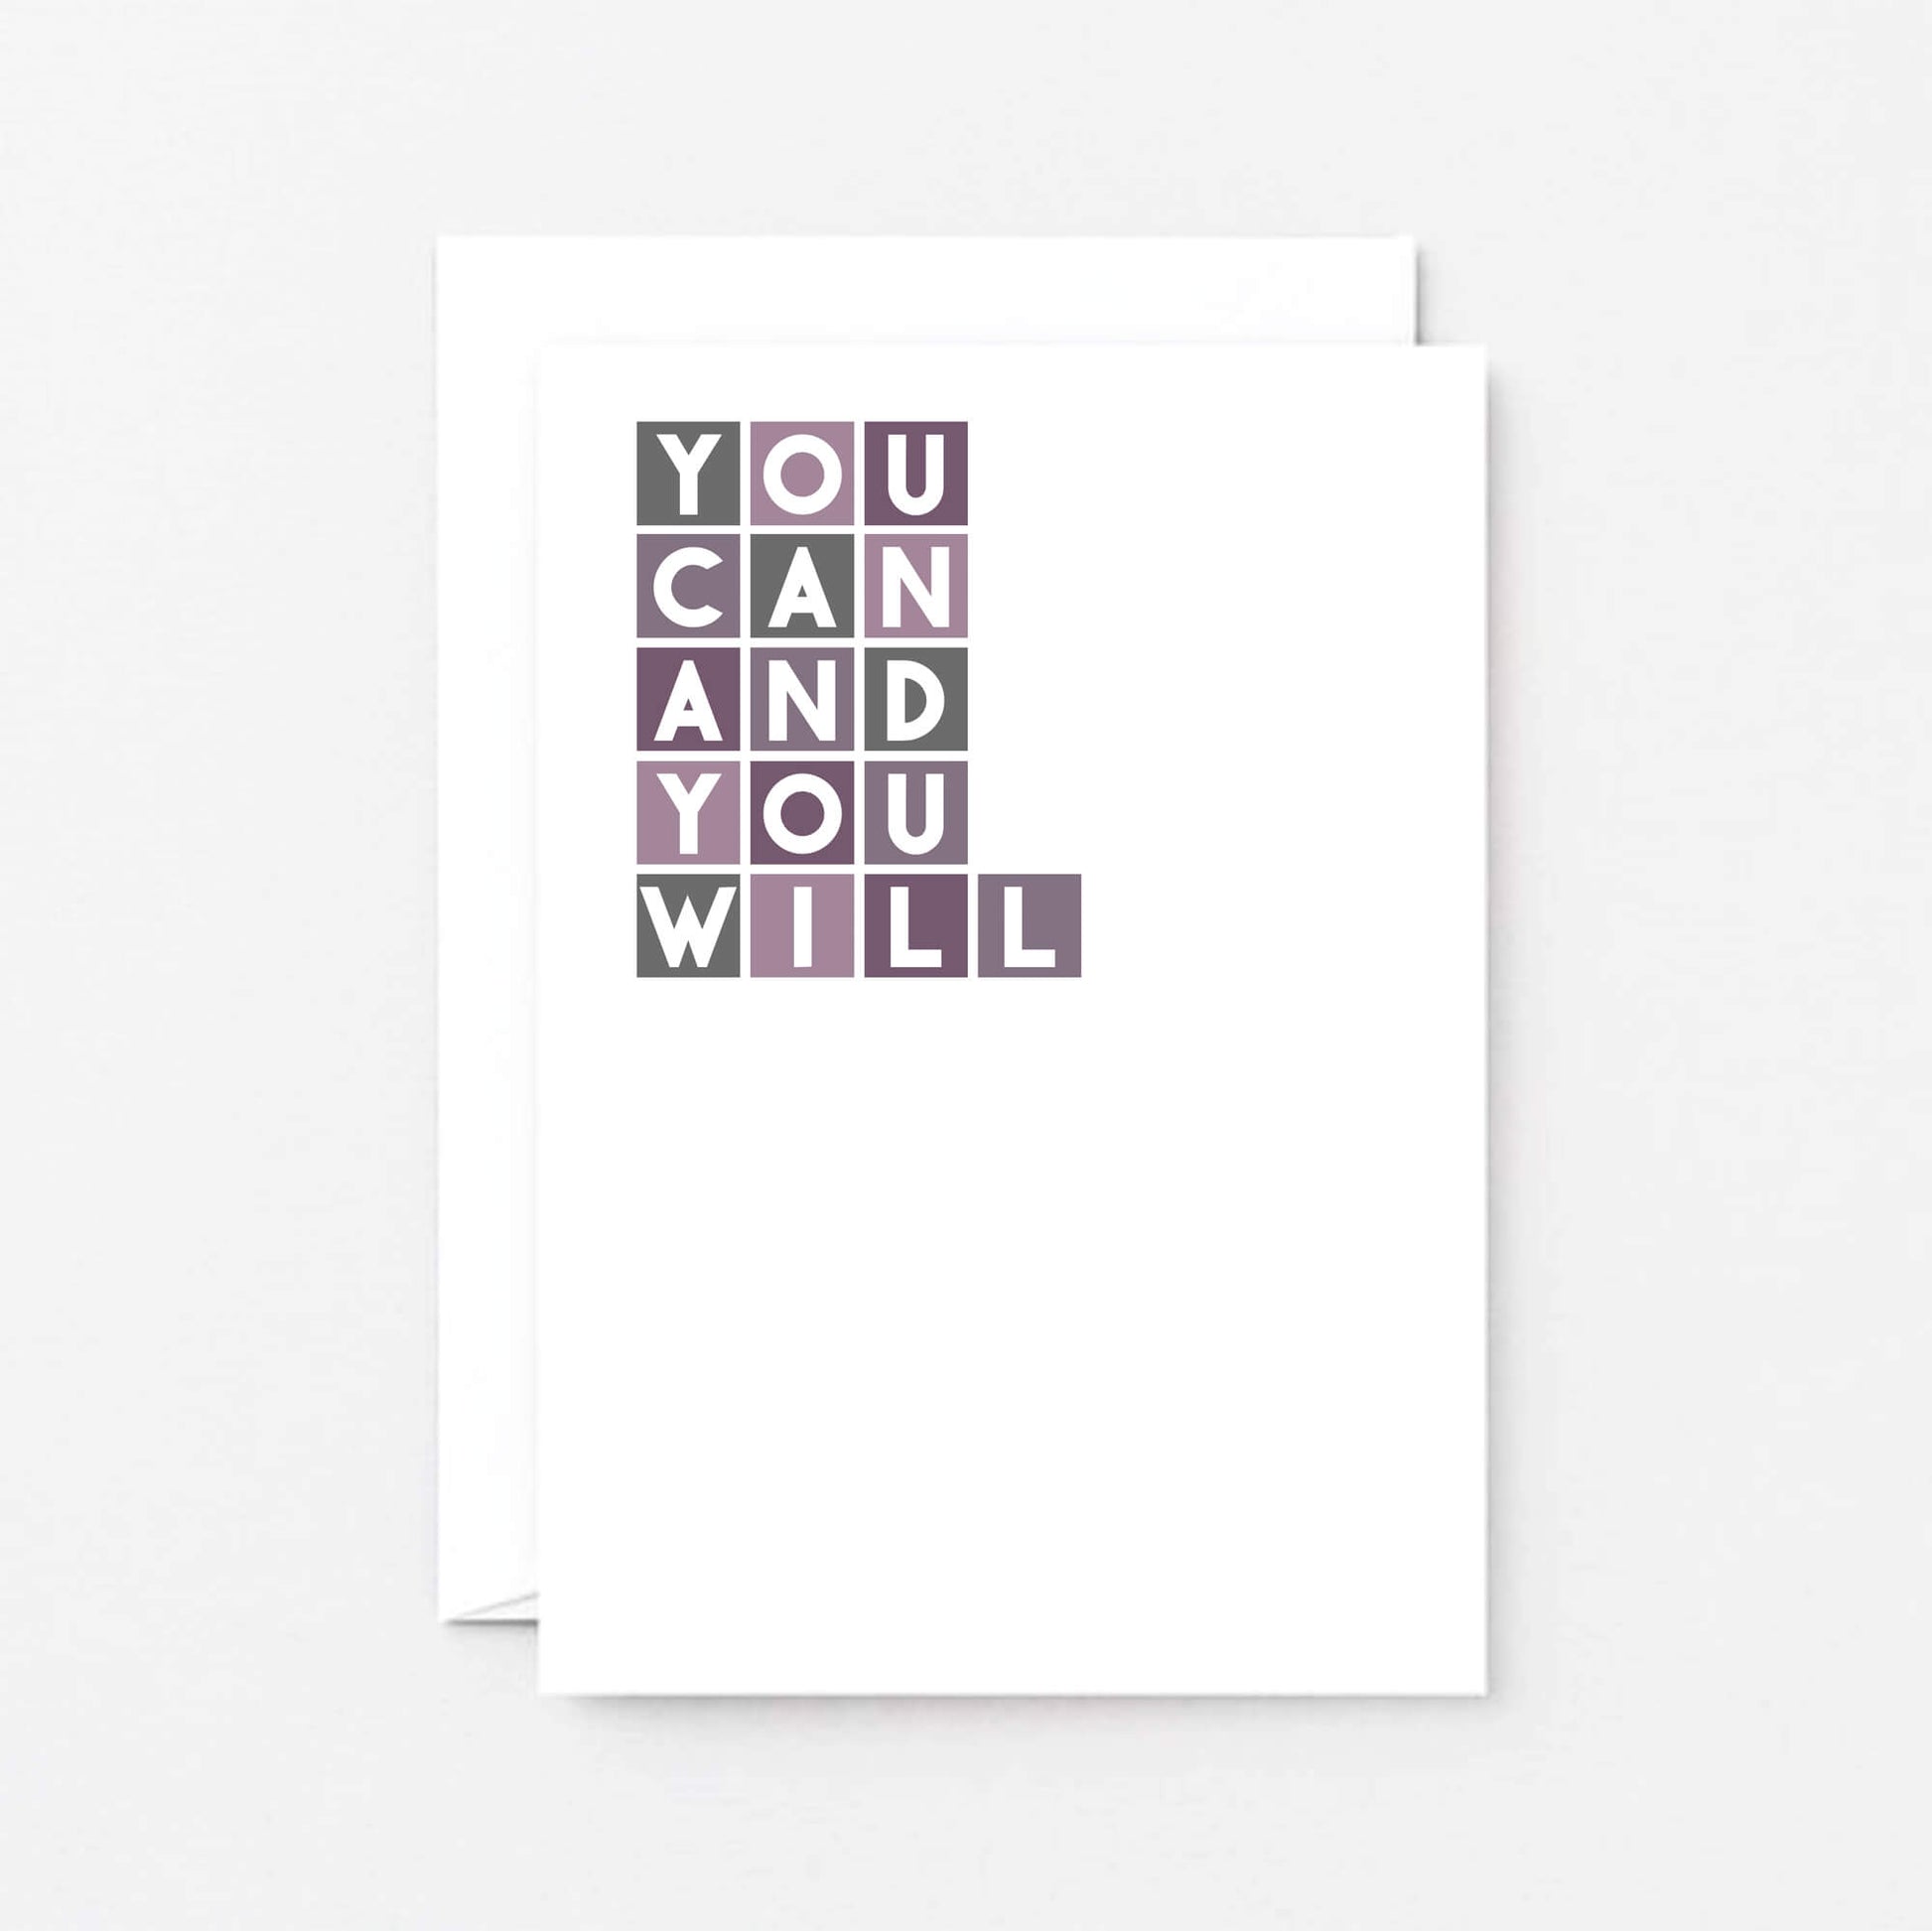 Encouragement Card by SixElevenCreations. Reads You can and you will. Product Code SE0334A6